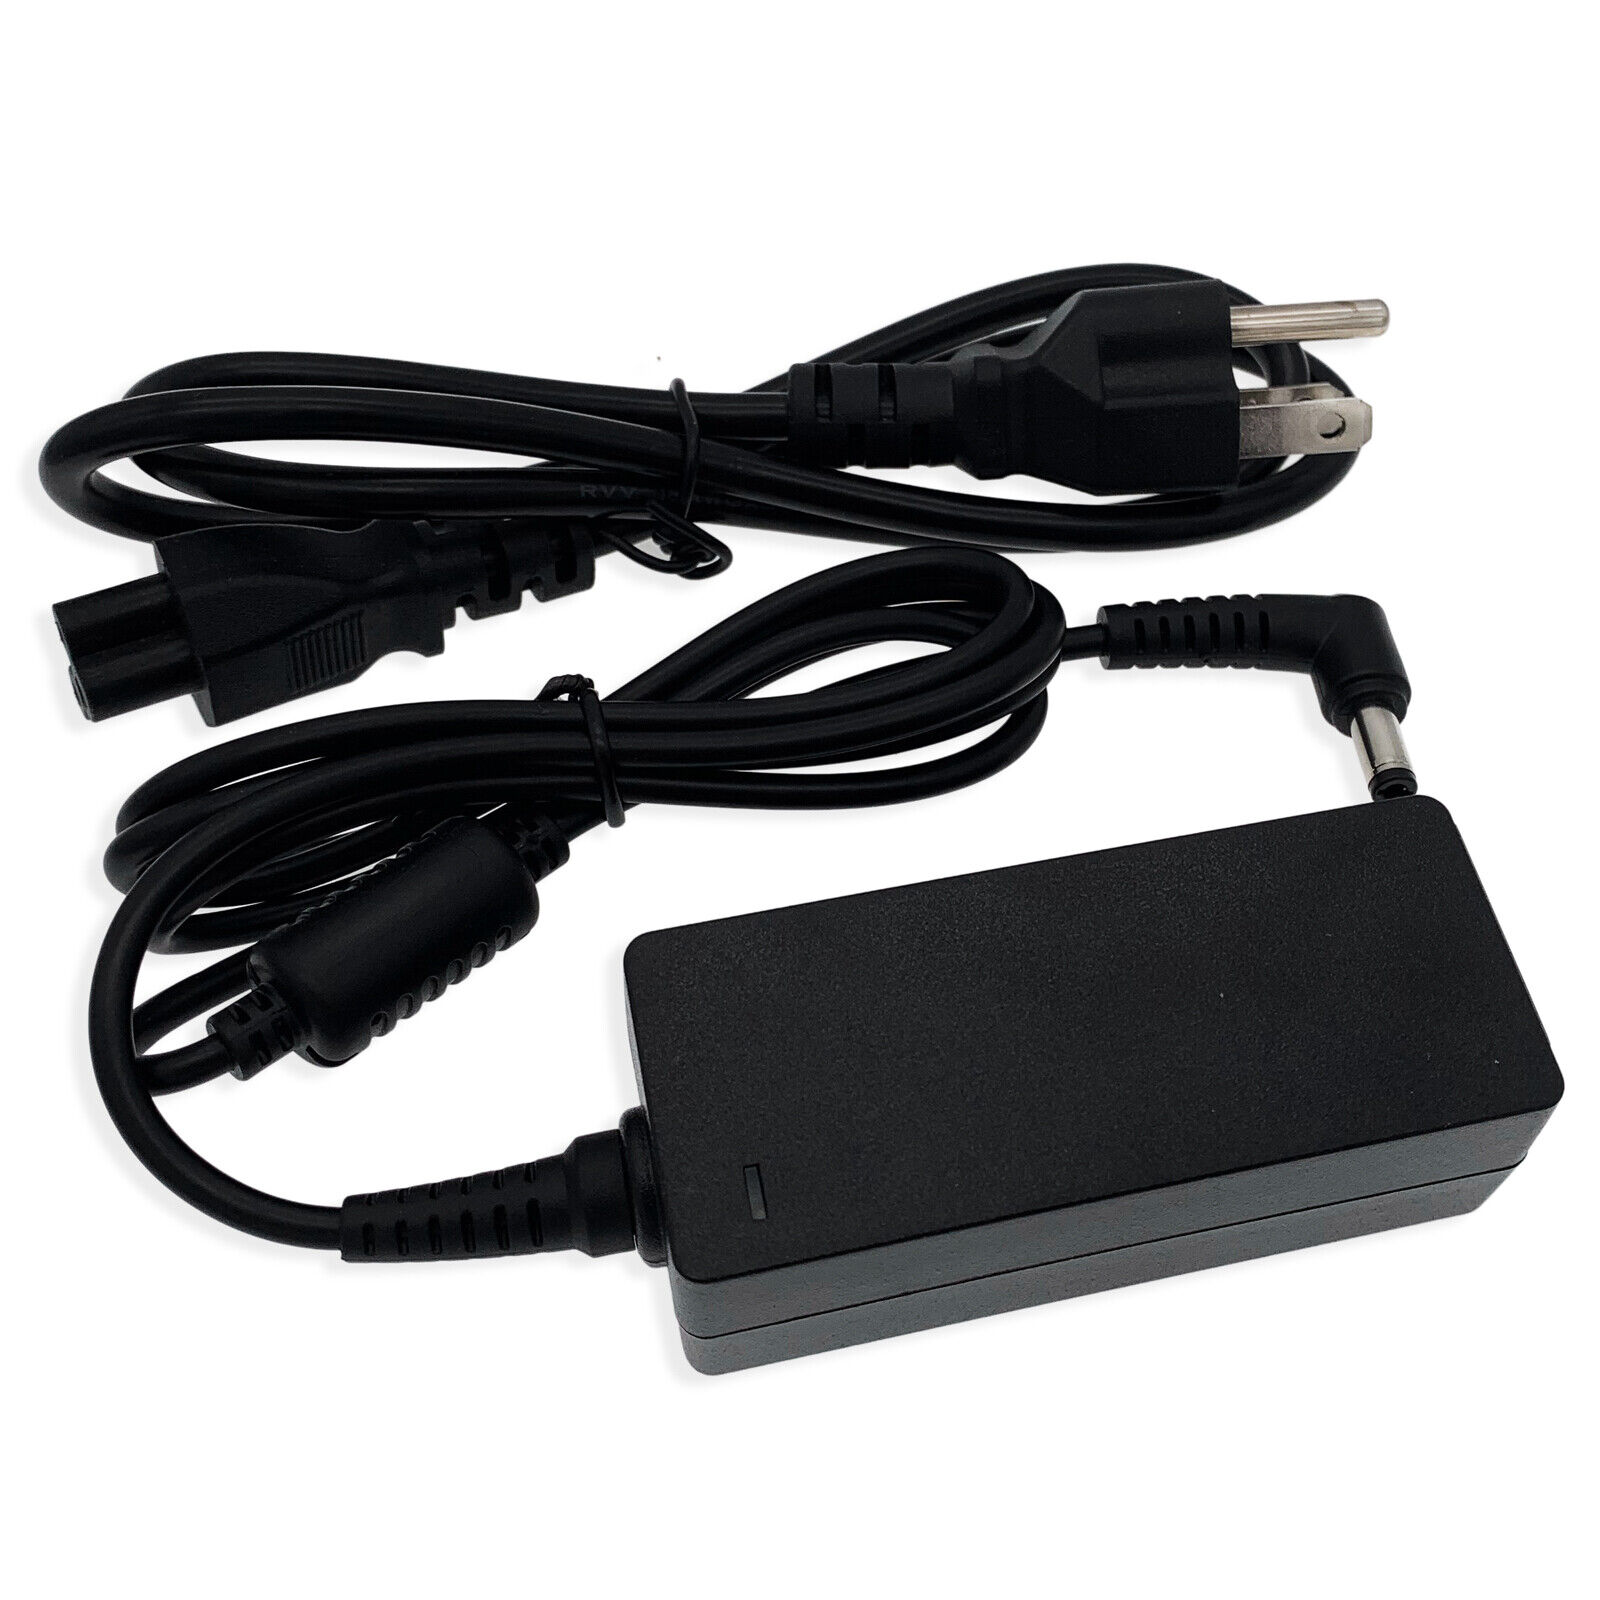 24V AC Adapter for Qili Power Model: QL-09005-B2401500H 24 Volt Class 2 This product is good for the following Models a